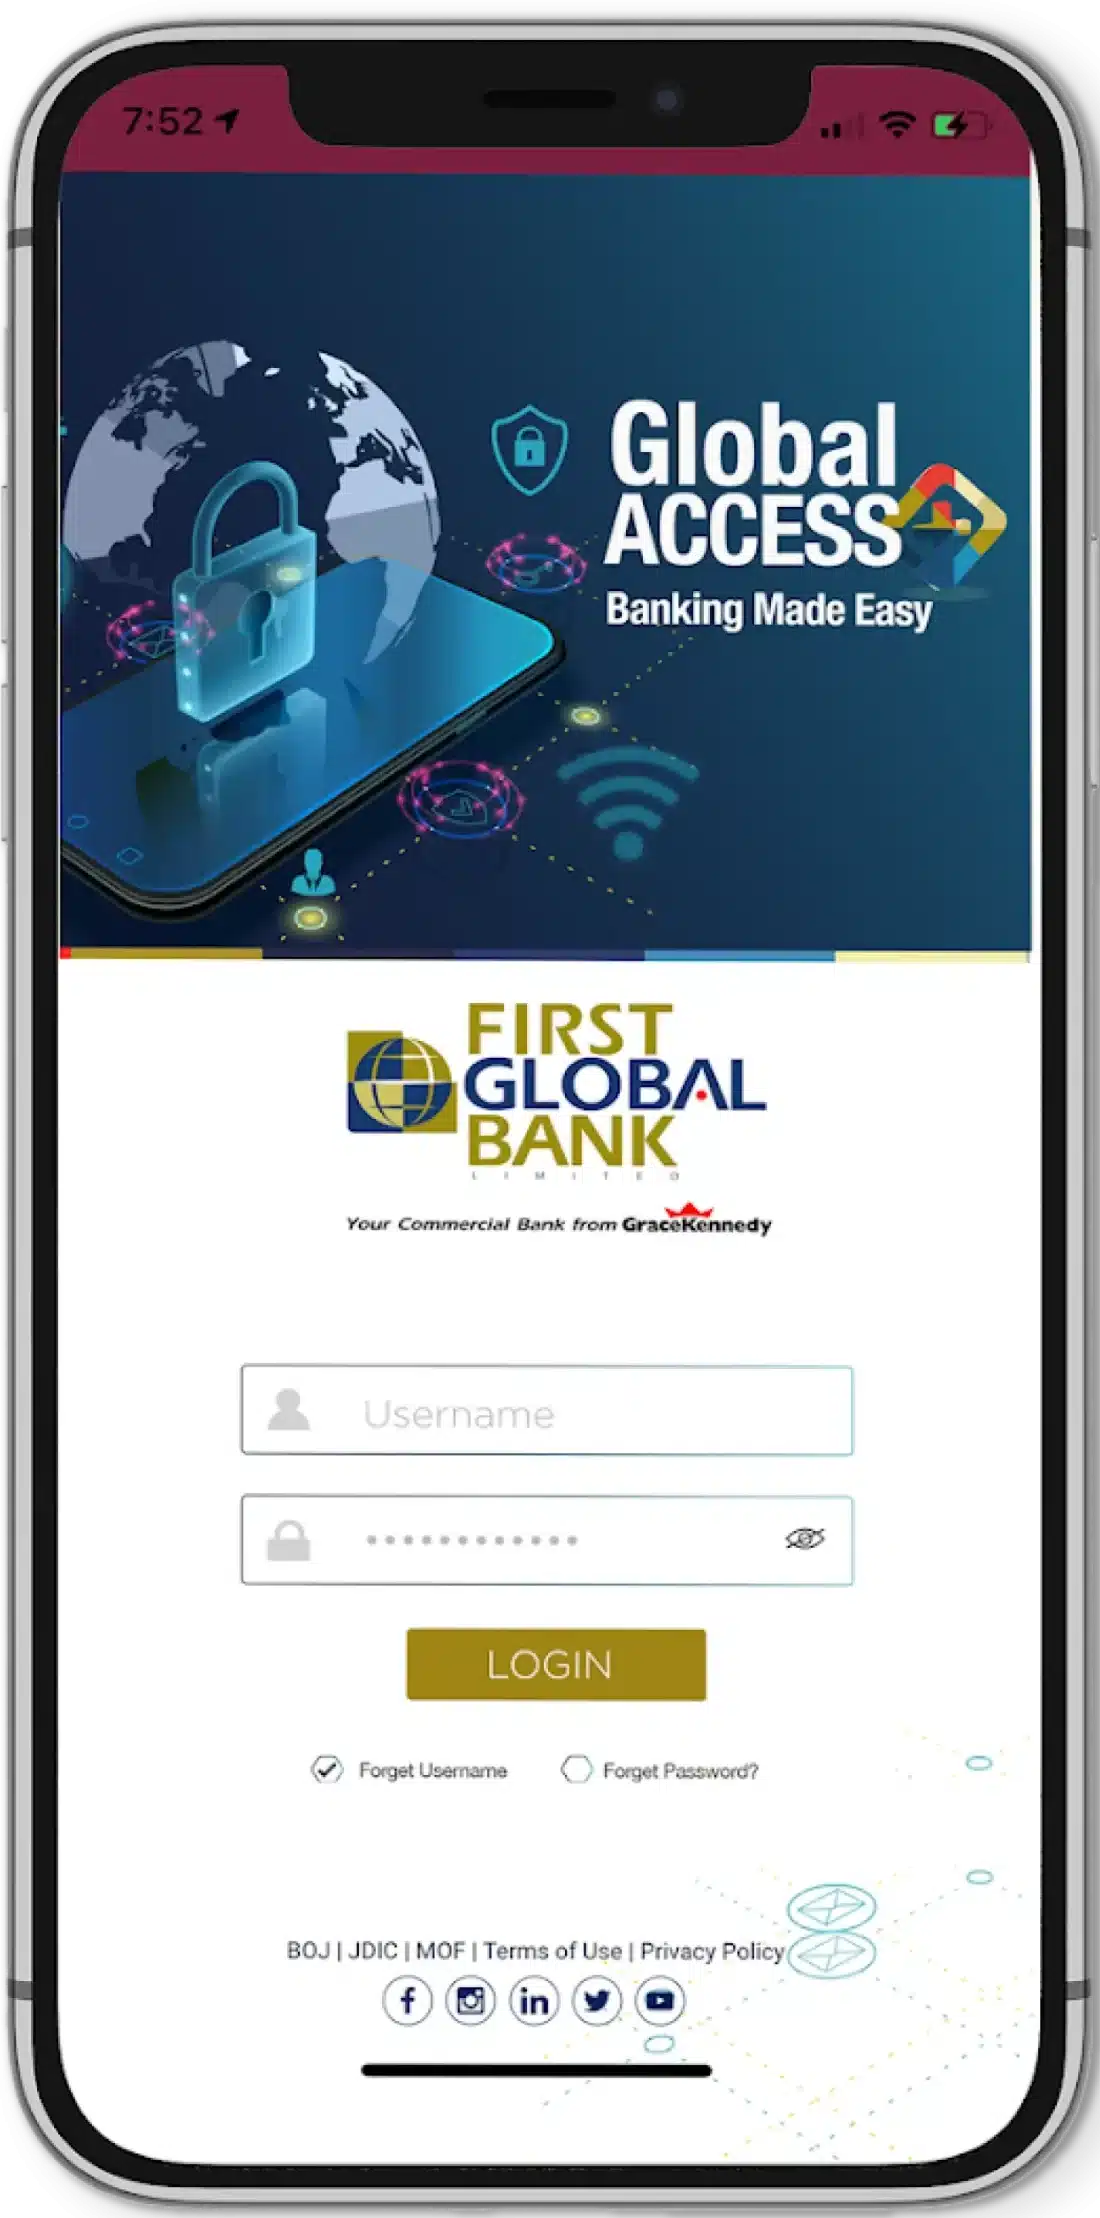 First Global bank mobile app on a mobile phone